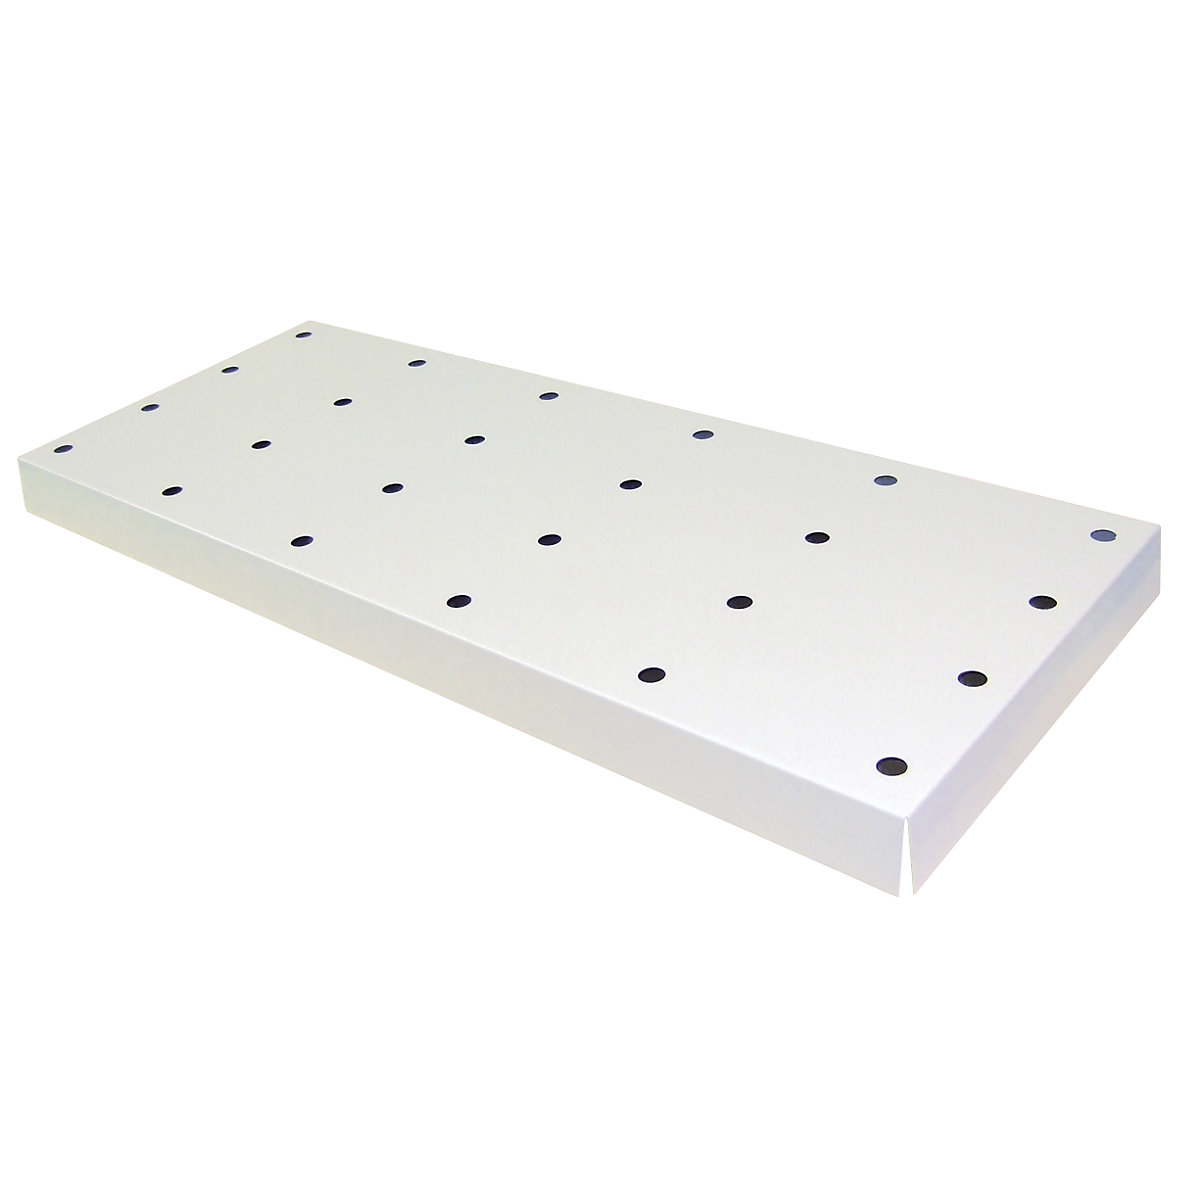 Perforated metal cover for base sump tray - asecos